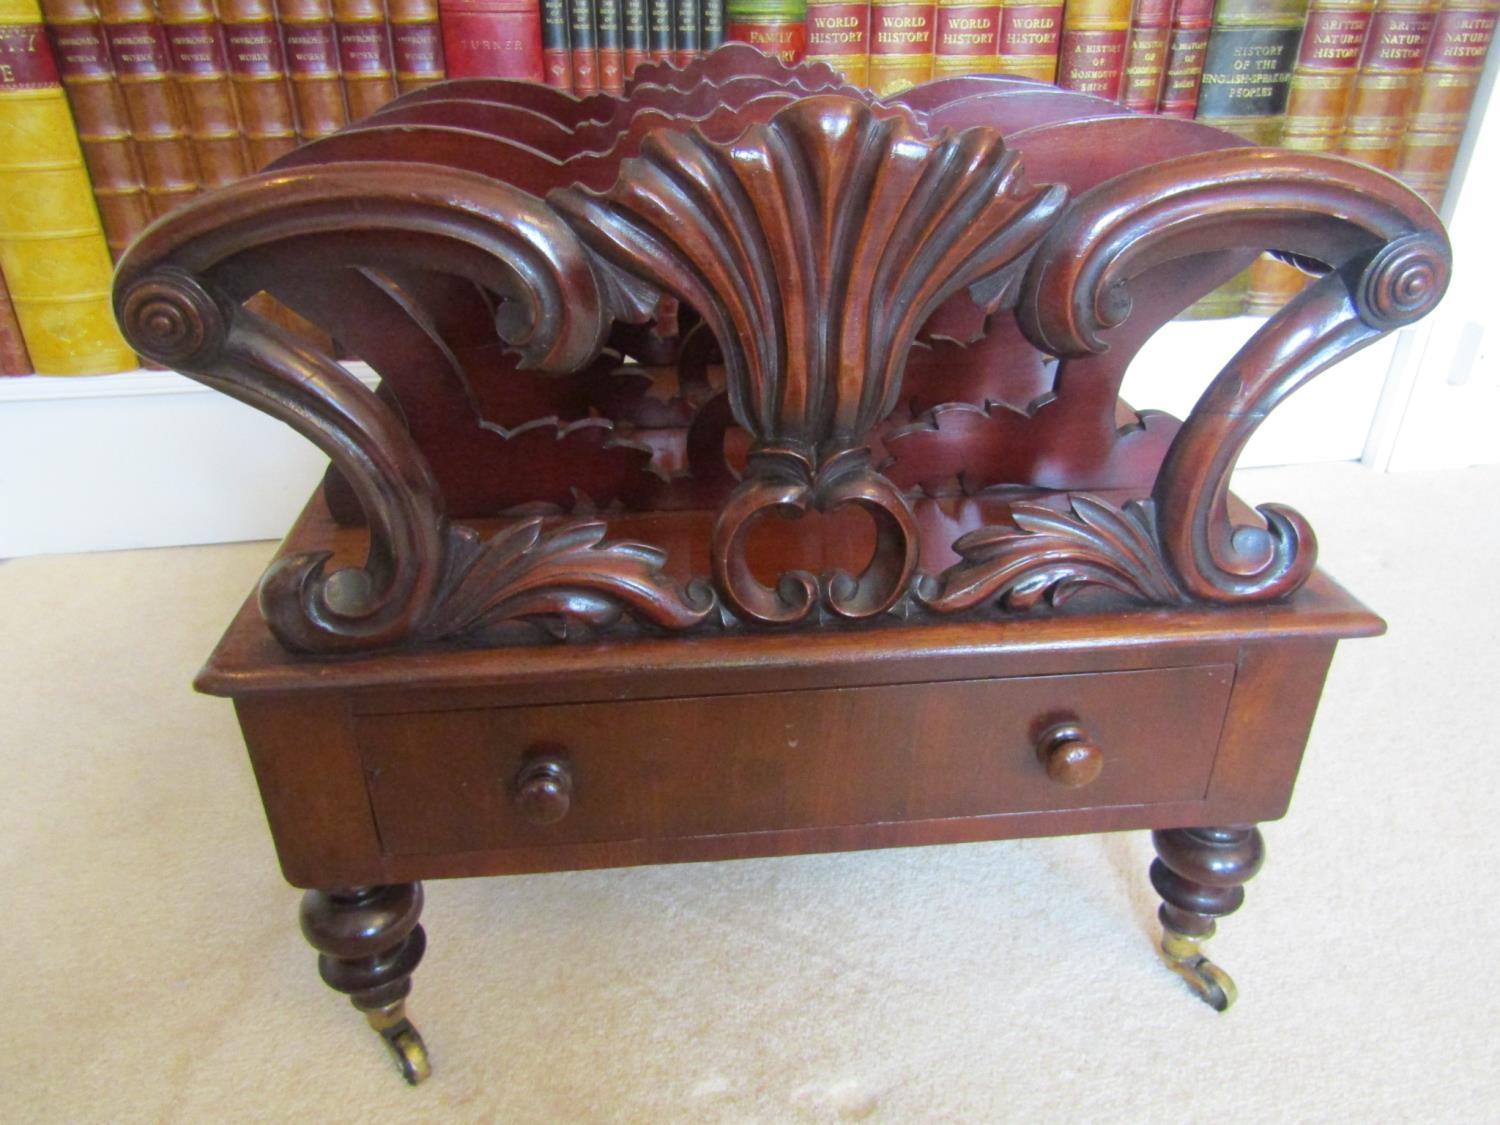 A Regency mahogany four divisional Canterbury, with carved and scrolled detail, over a single frieze